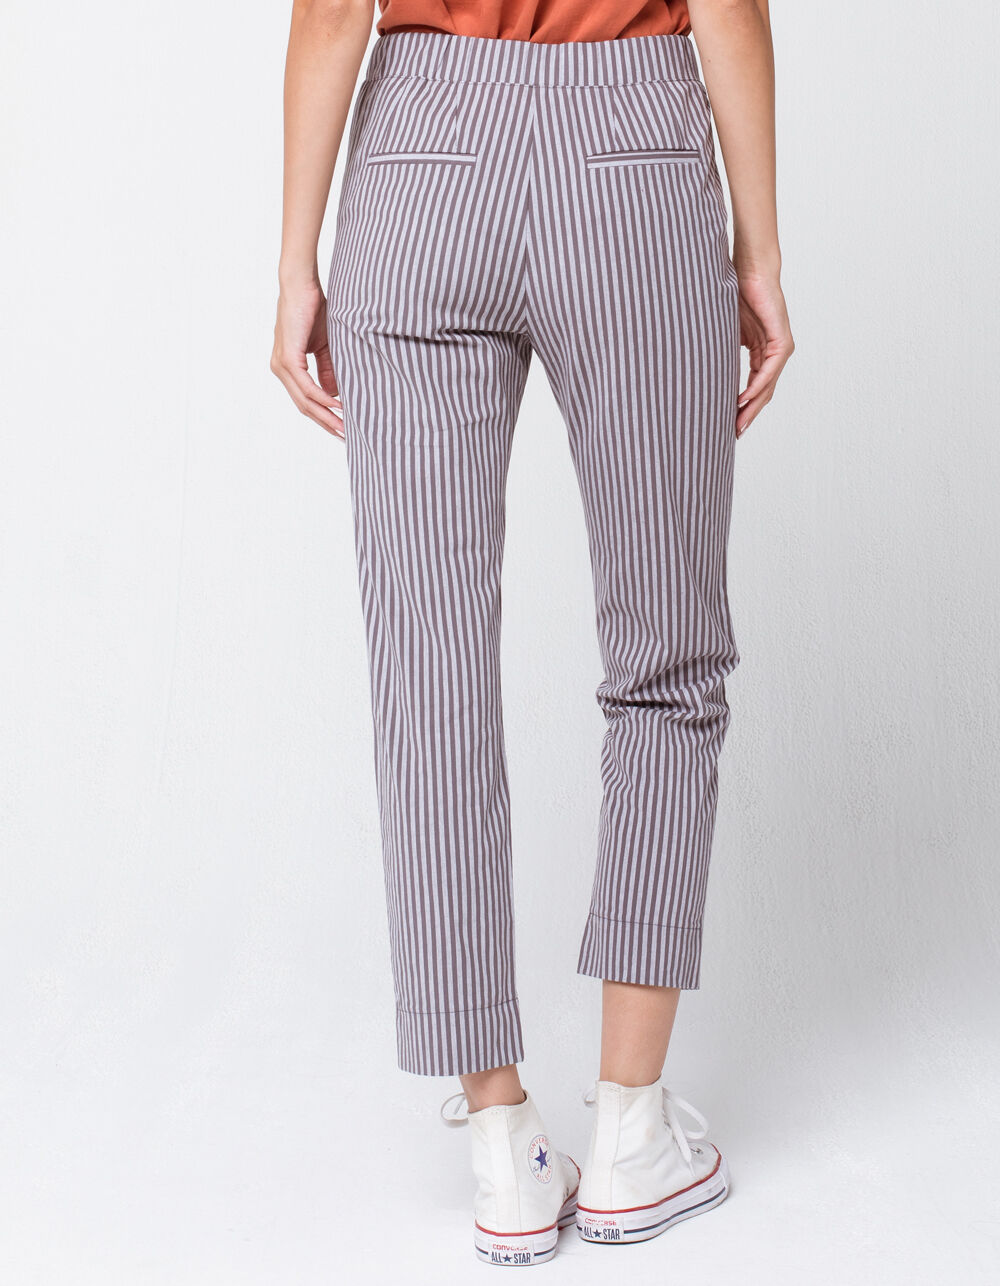 SKY AND SPARROW Stripe Womens Pants - GRAY | Tillys